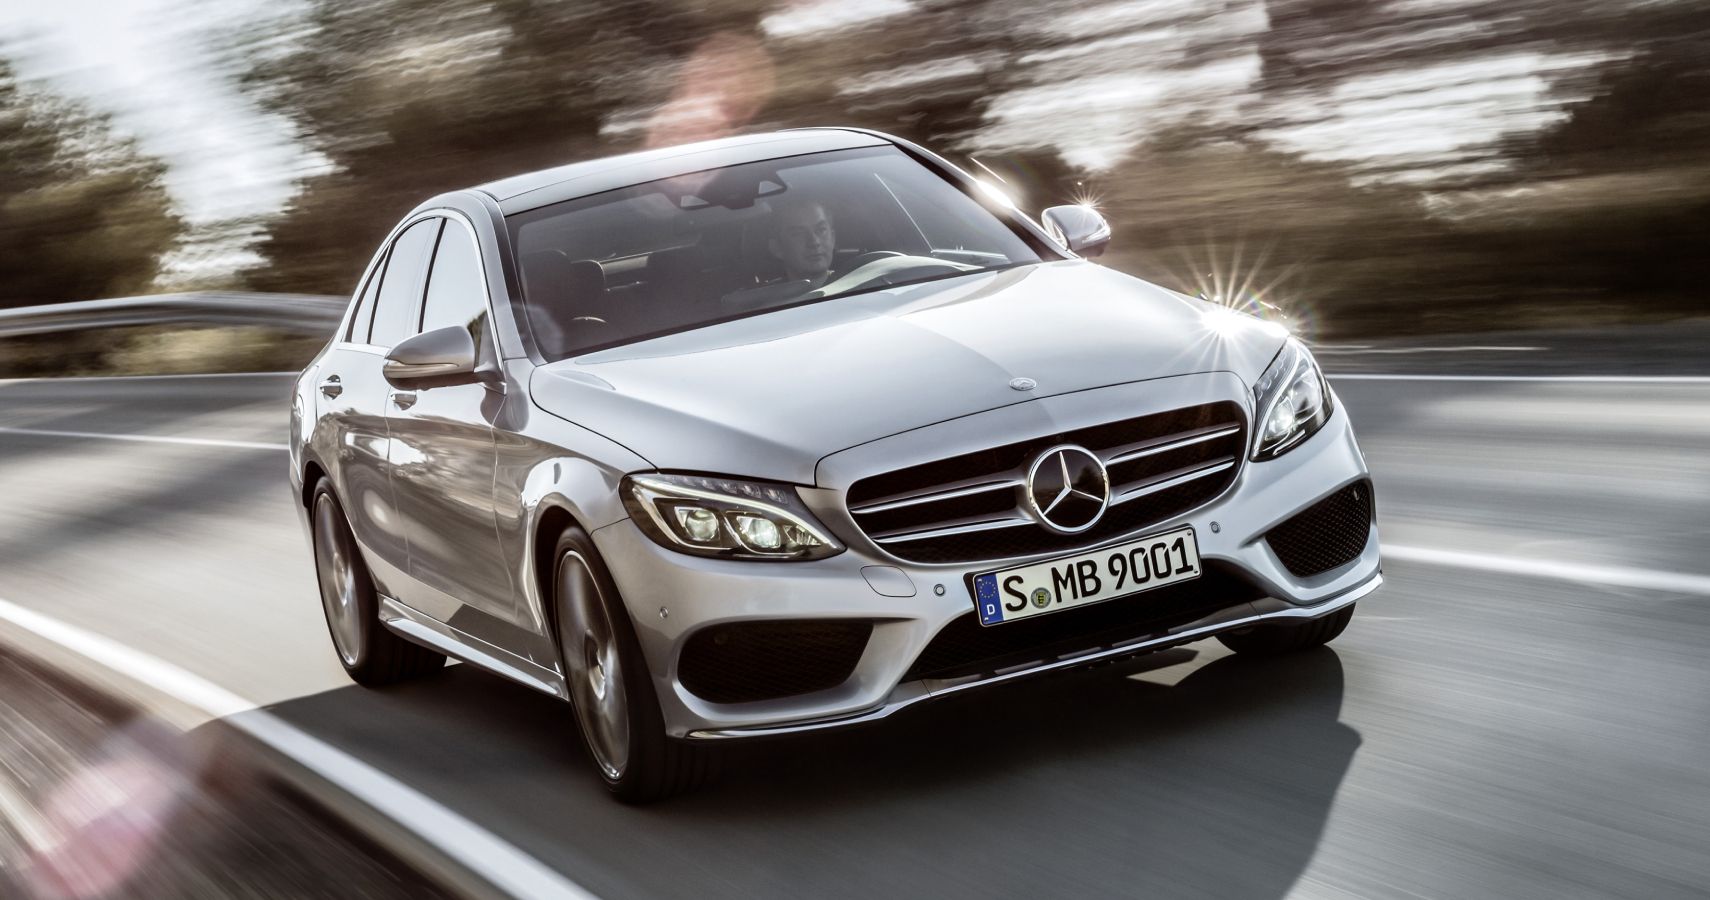 Silver 2015 Mercedes-Benz C-Class driven on the track